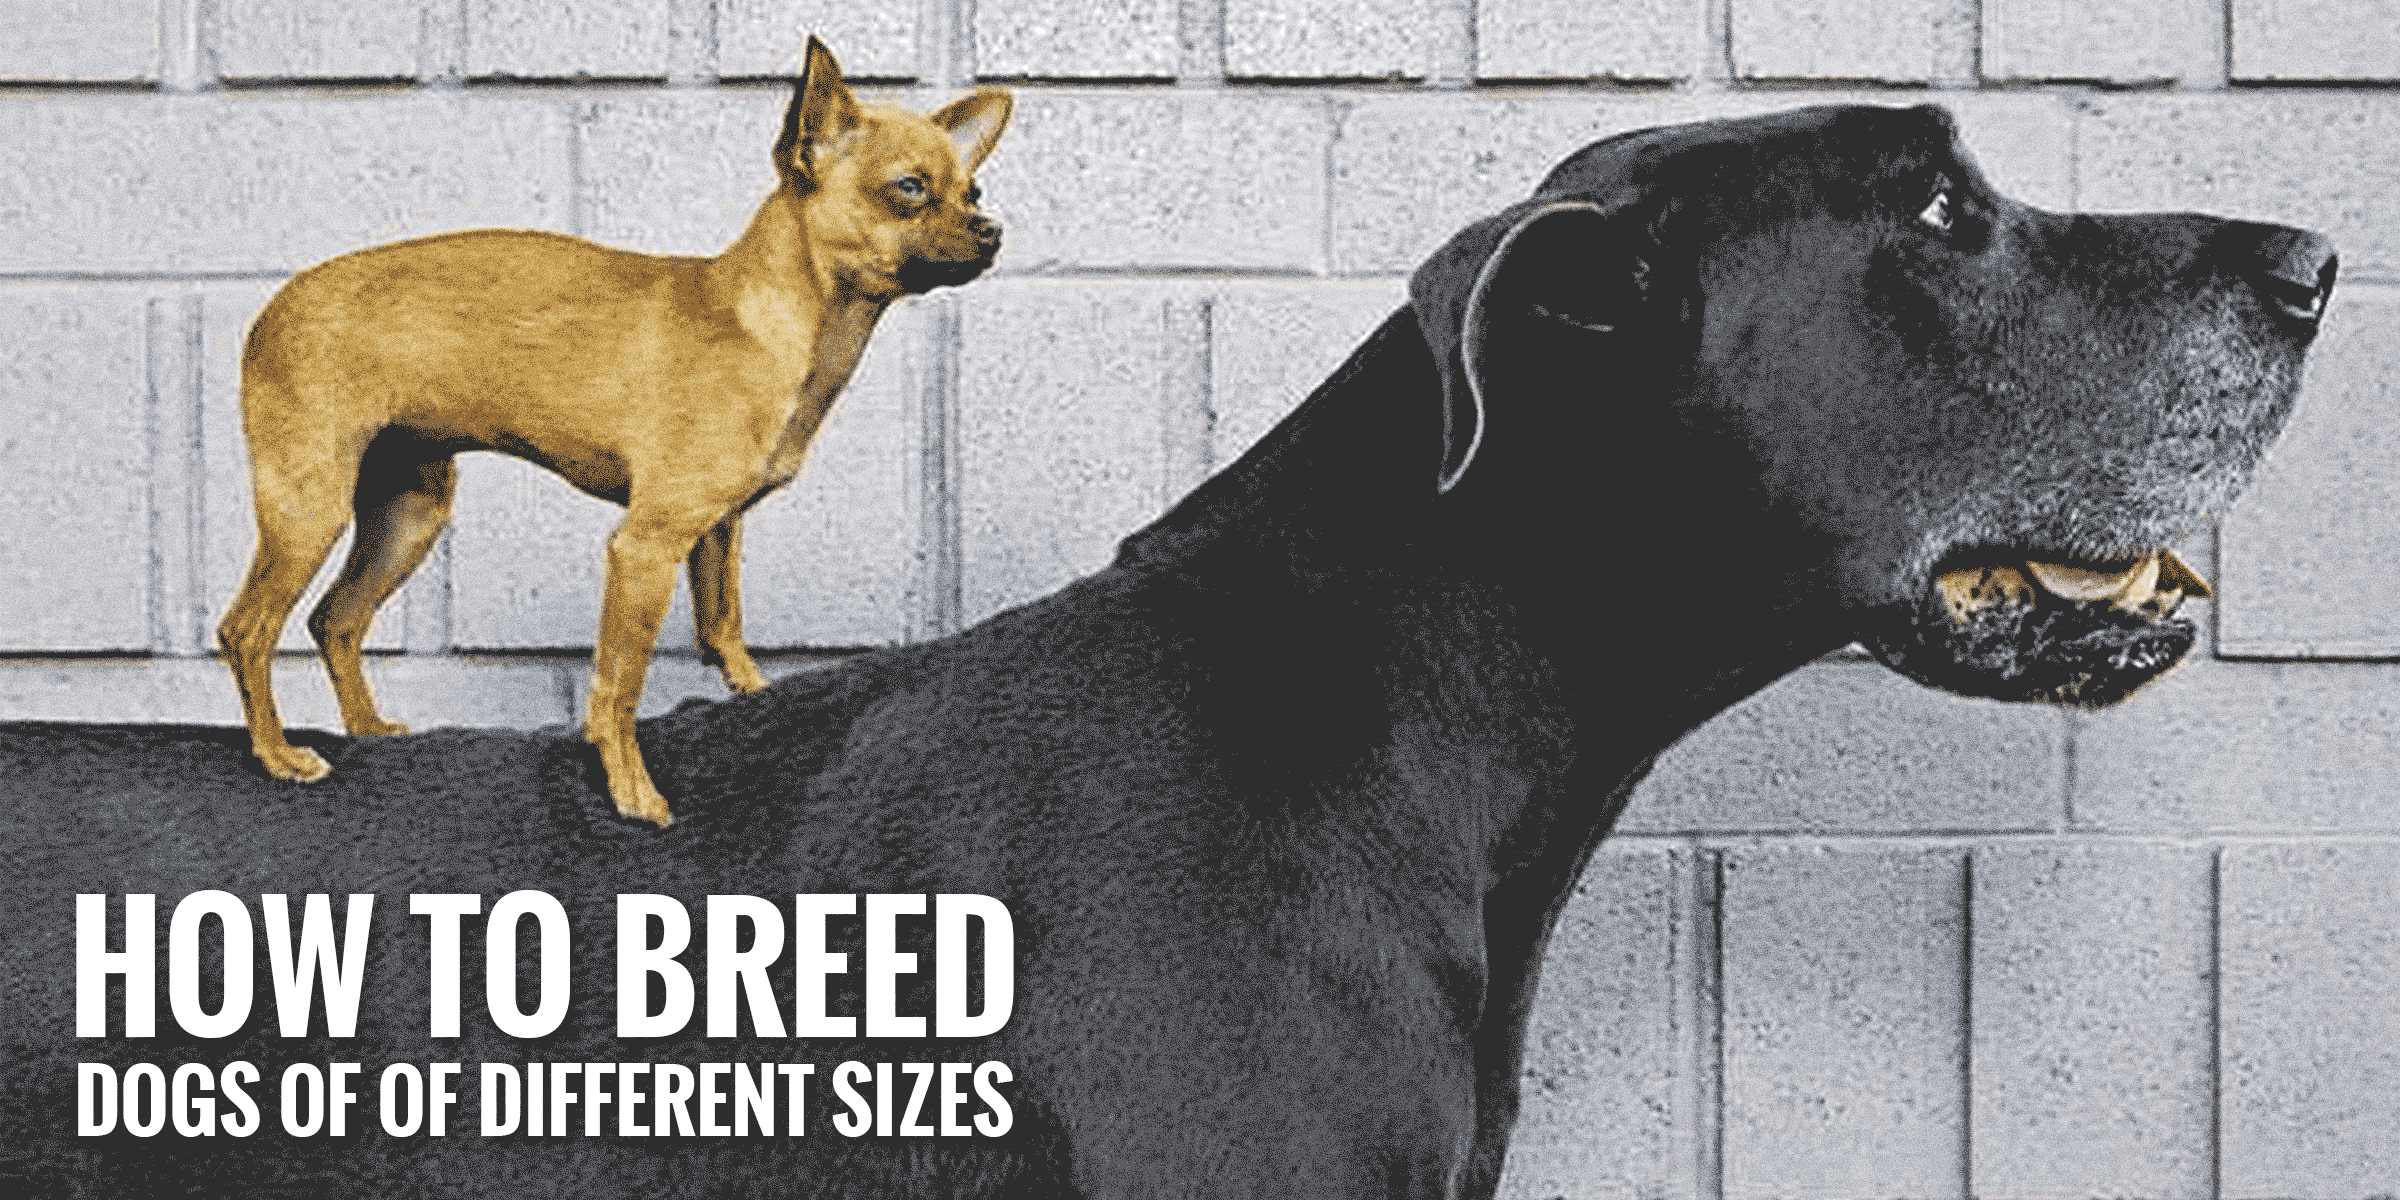 How to Breed Dogs of Different Sizes